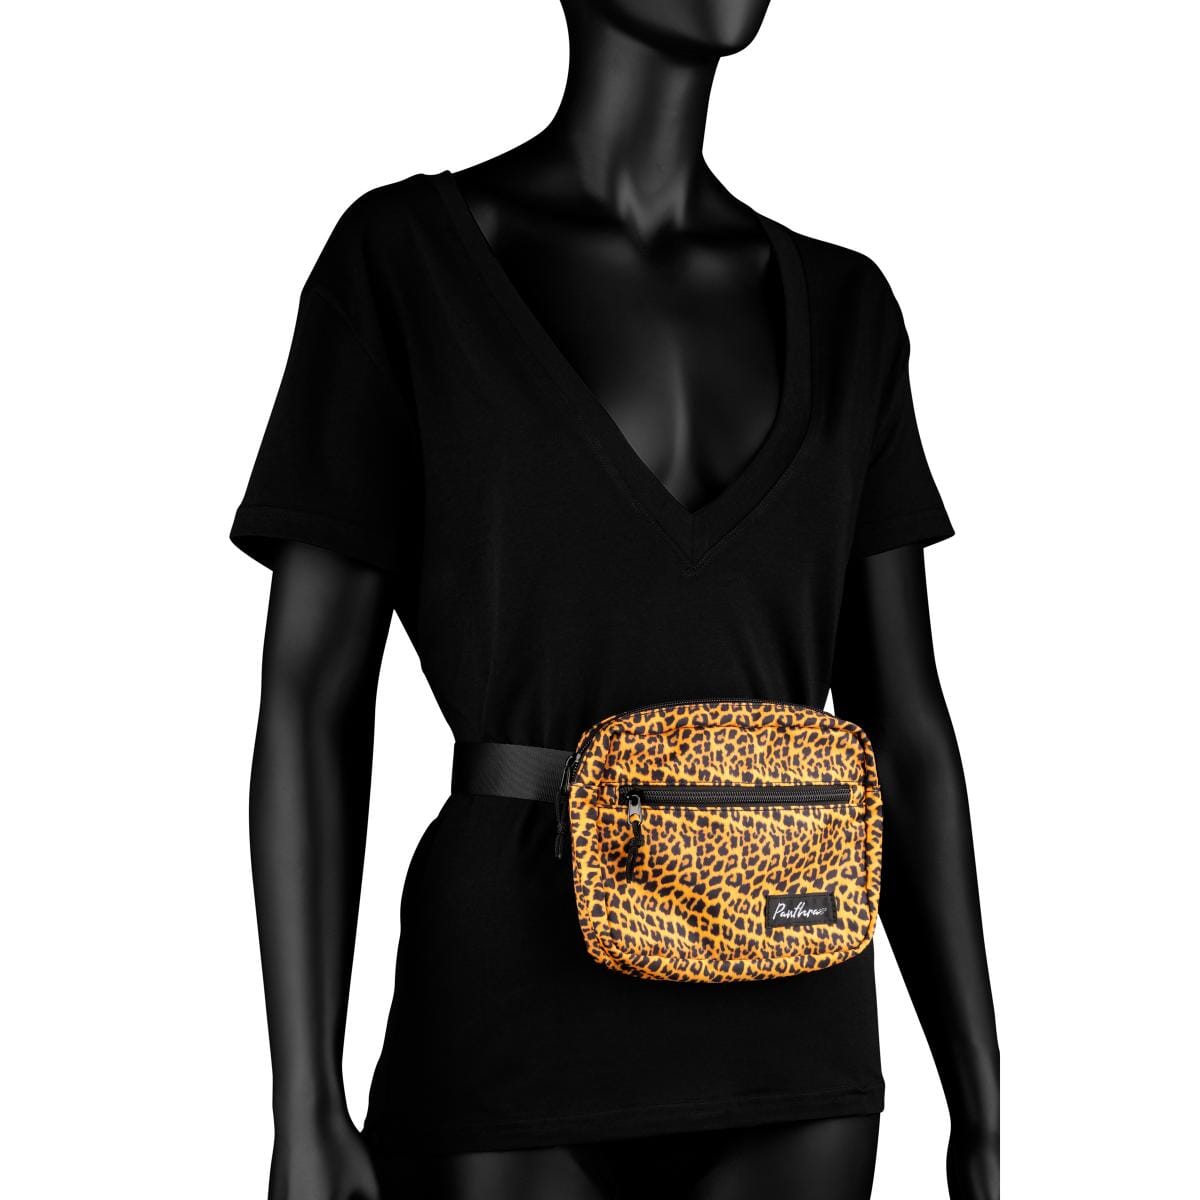 a female mannequin wearing a black shirt and a leopard print fanny bag